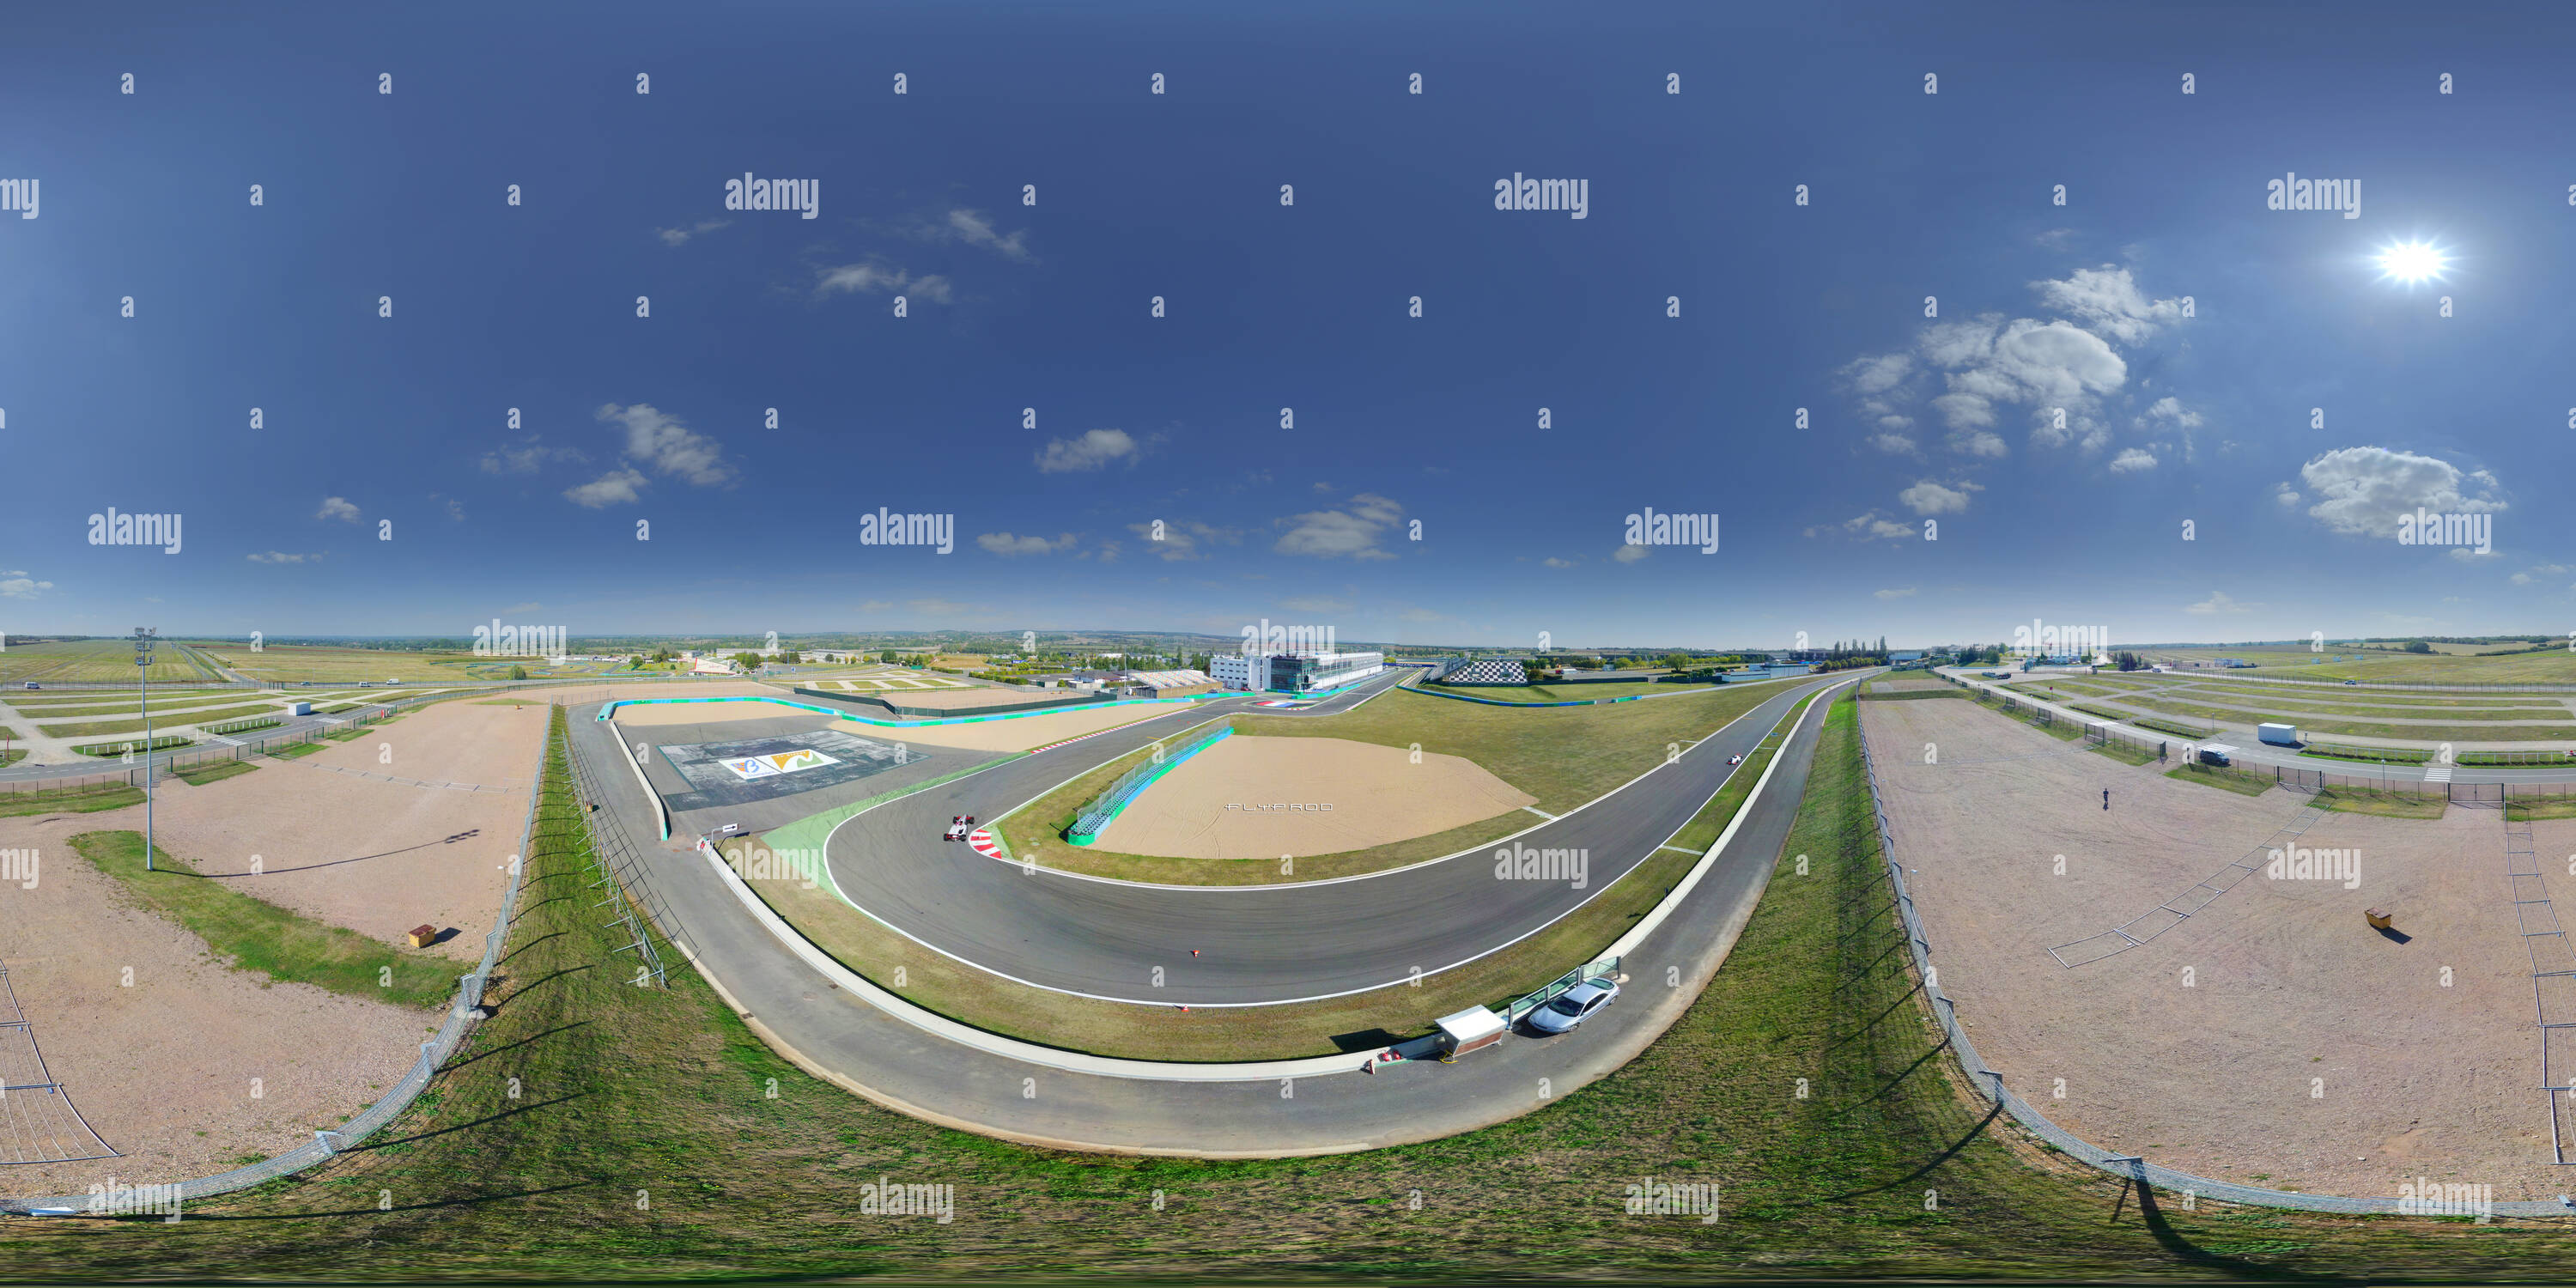 360 degree panoramic view of Le circuit de Nevers Magny-Cours